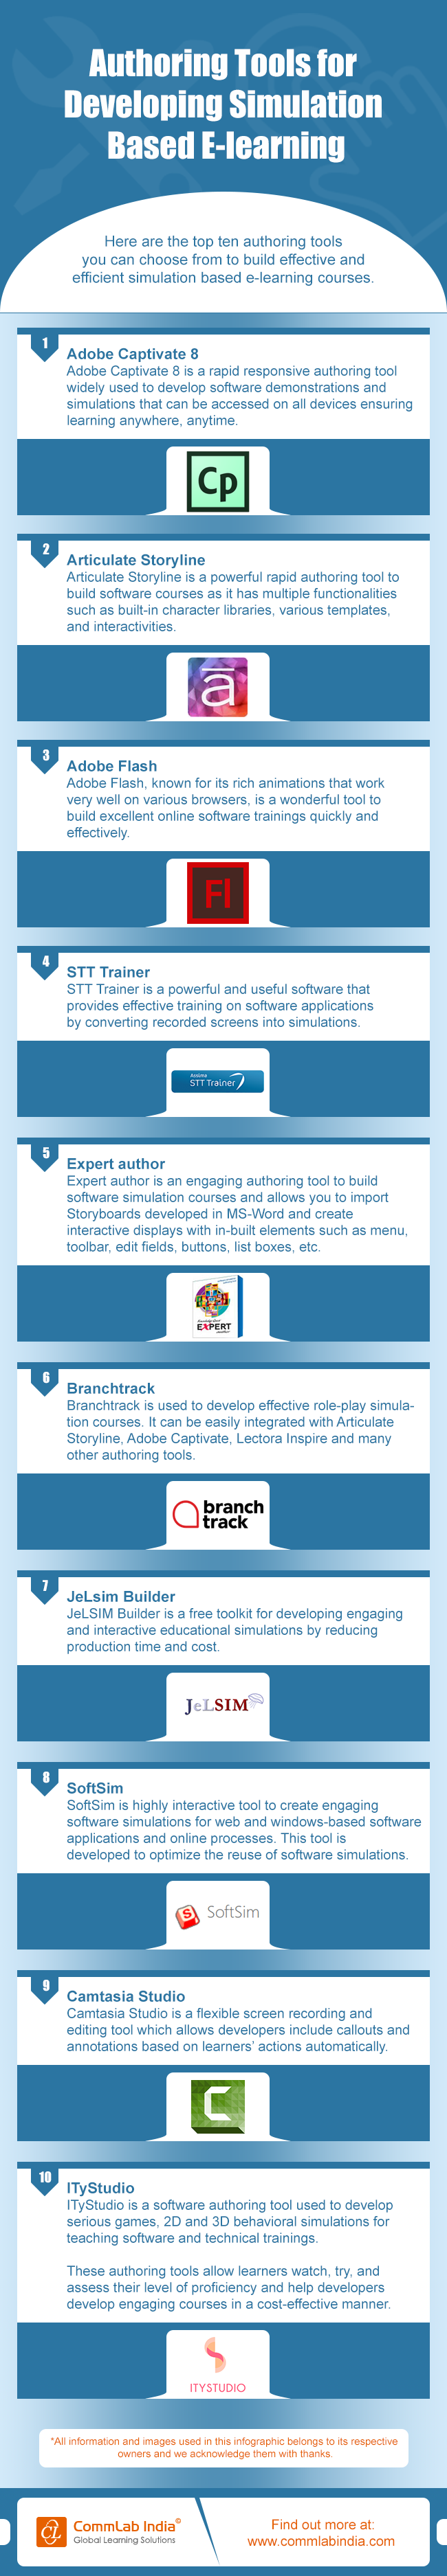 Authoring Tools for Developing Simulation Based E-learning [Infographic]